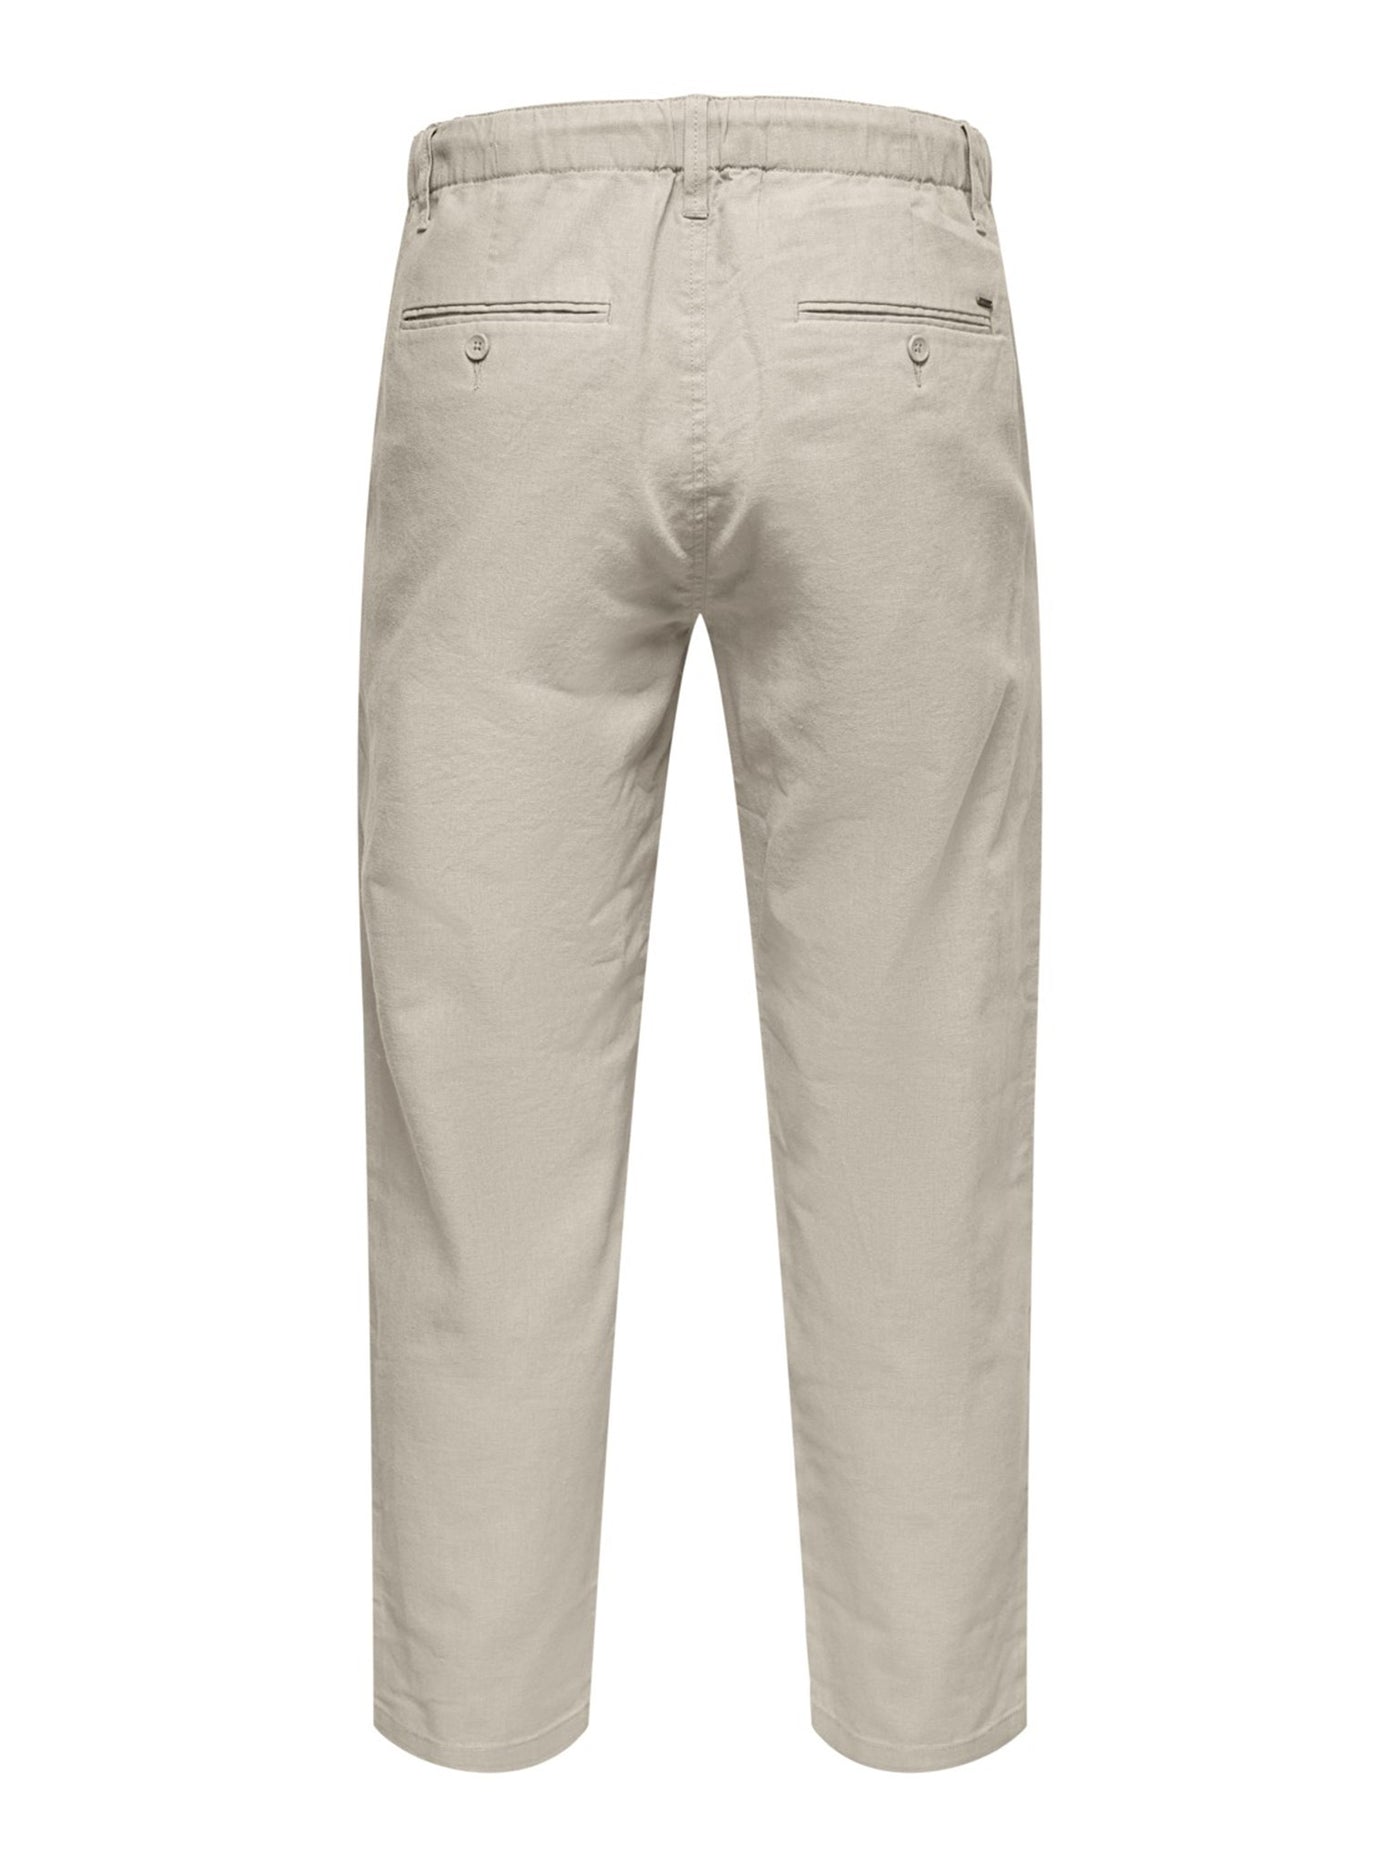 Linen Pants - Silver Lining - Only & Sons - Khaki 4